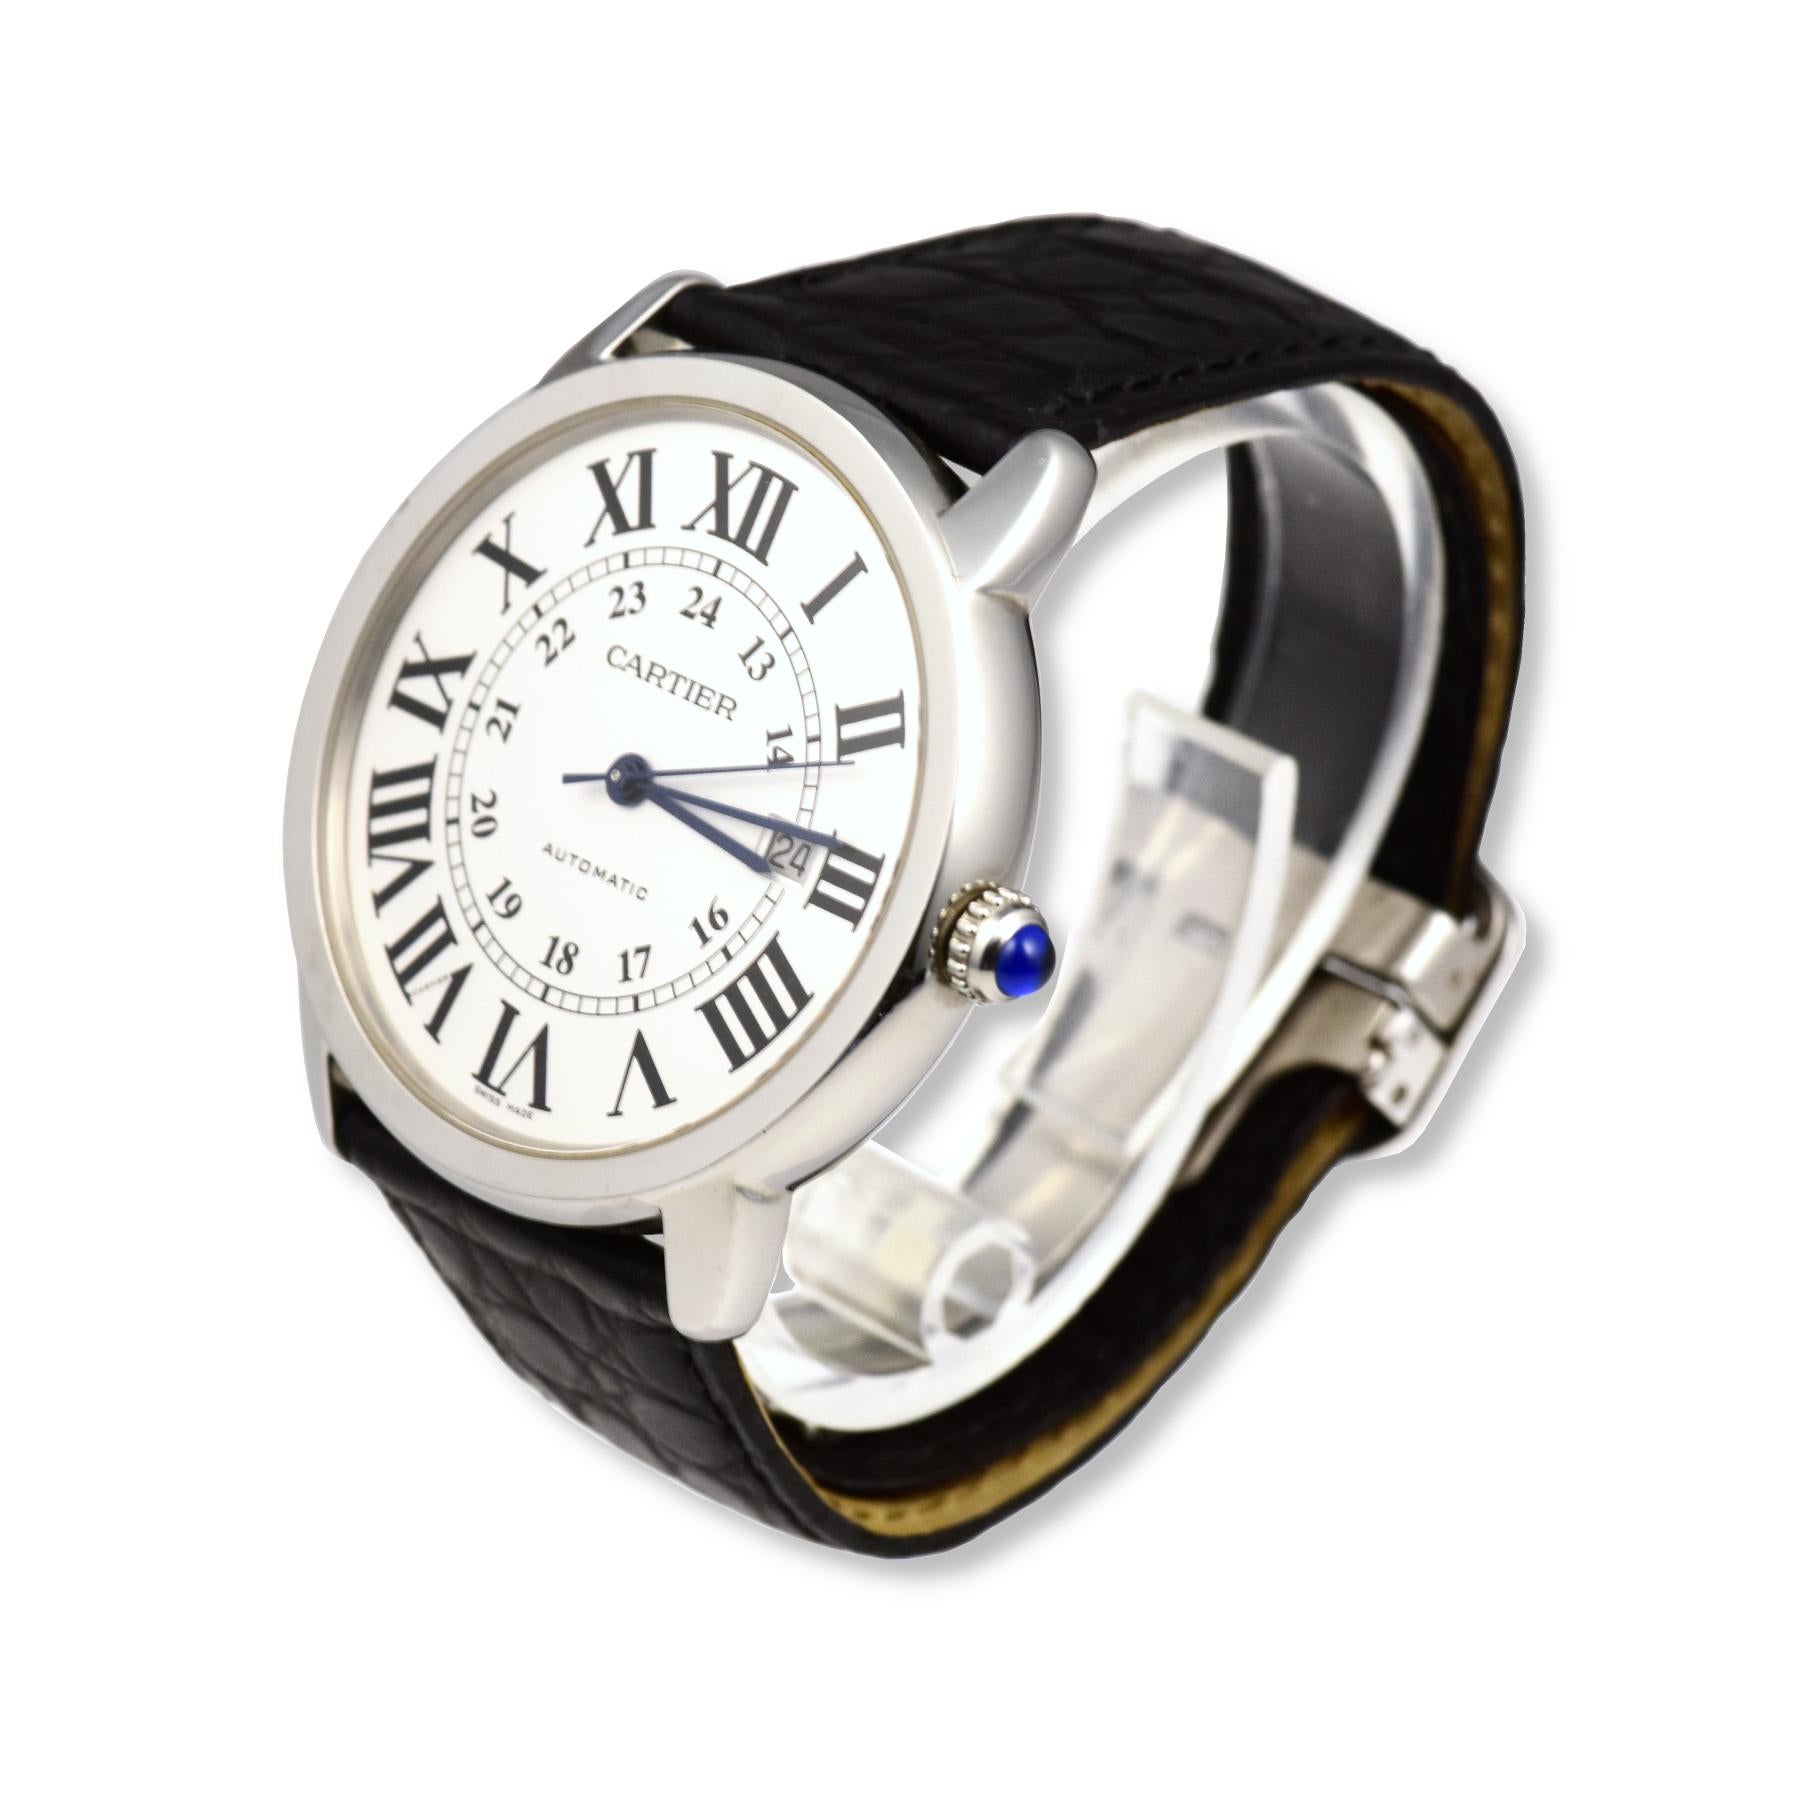 Brand: Cartier
Model: Ronde Solo 
Movement: Automatic 
Case Size: 42 mm
Dial: Roman Numeral
Case Material: Stainless Steel 
Bracelet Material: Leather 
Crystal: Scratch-Resistant Sapphire Glass
Includes: 24 Month Brilliance Jewels Warranty
         